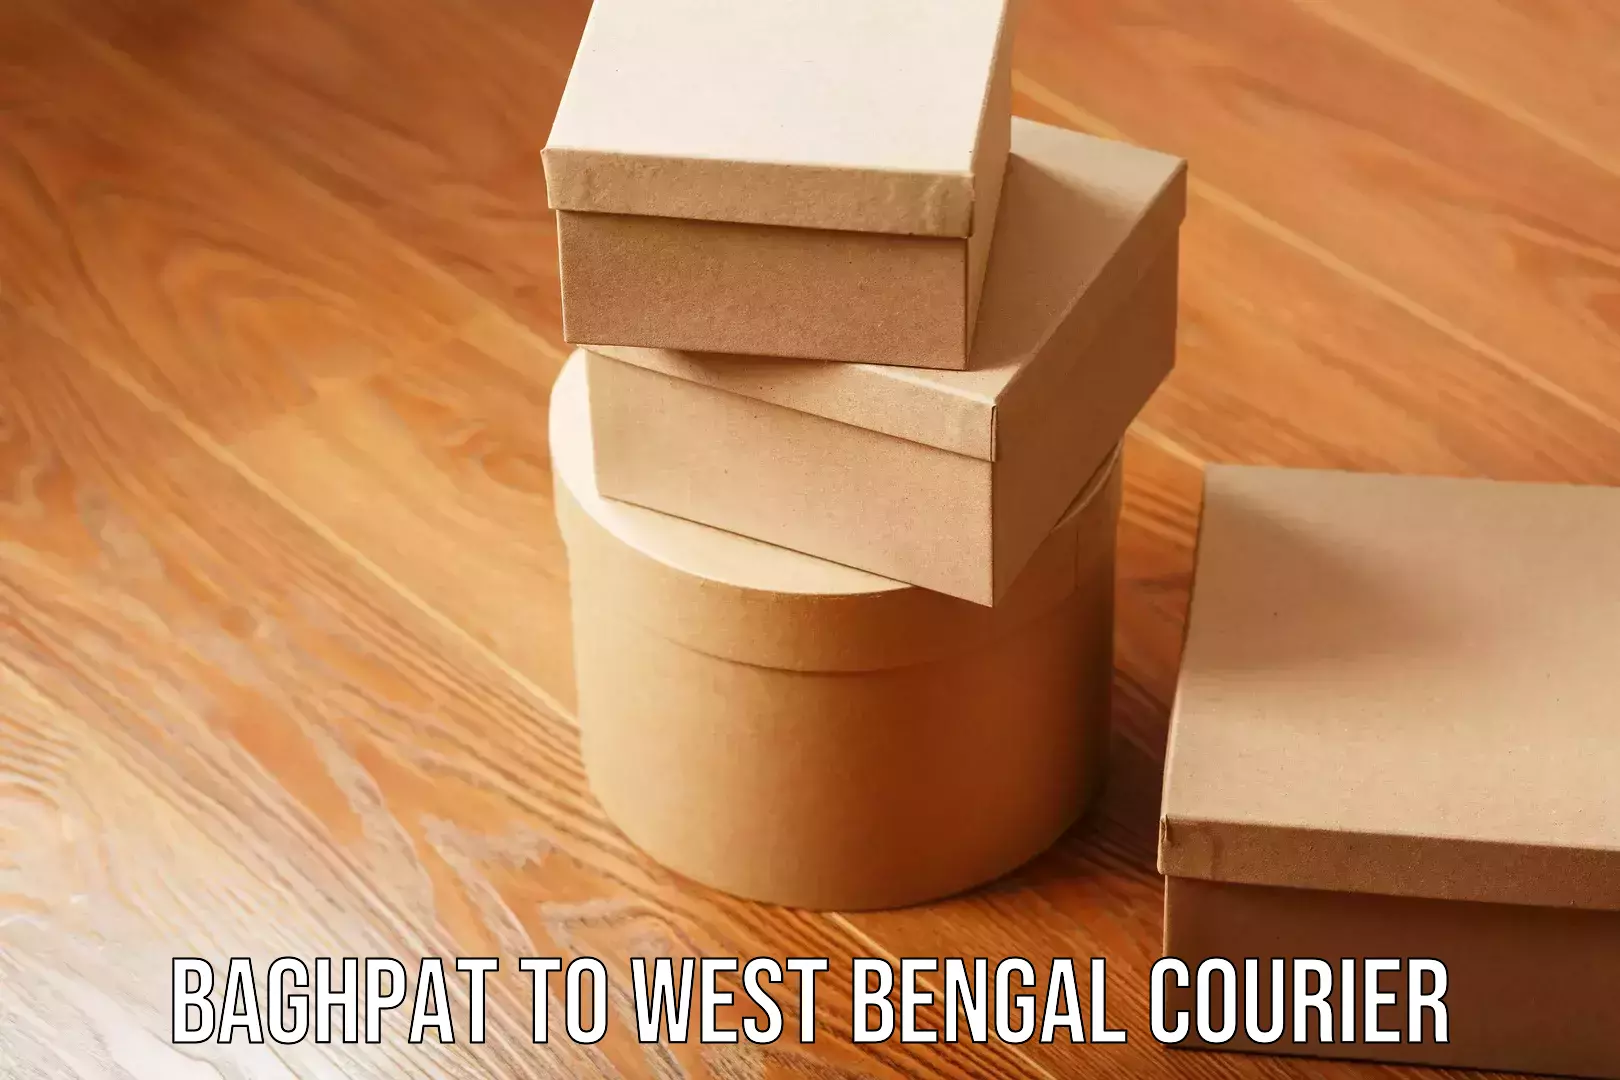 Customer-centric shipping Baghpat to West Bengal